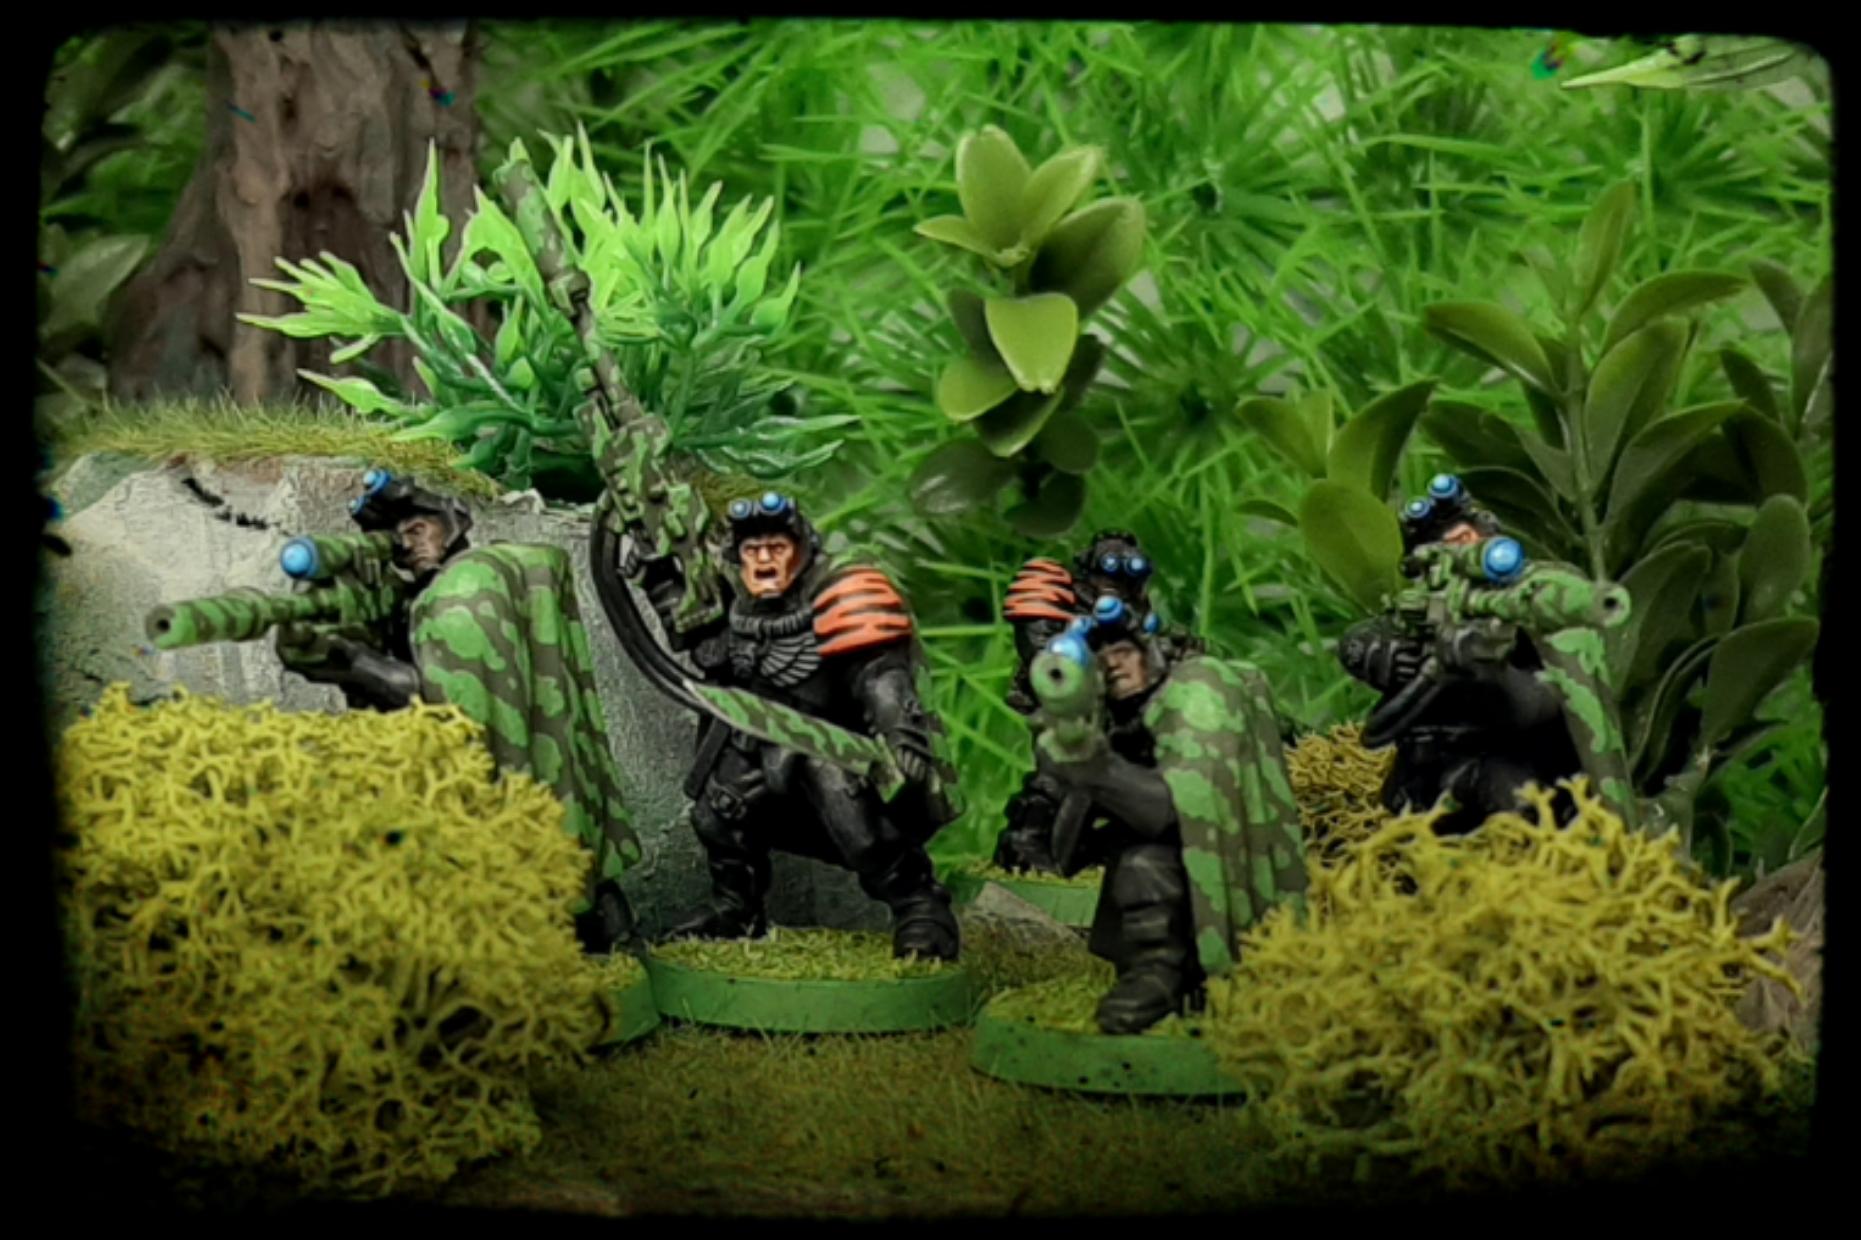 Adeptus, Astartes, Camouflage, Conversion, Custom, Fighting, Forest, Ghuyarashtra, Infiltrate, Infiltrator, Jungle, Kitbash, Mahaduyana, Reconnaissance, Scouts, Snipers, Space, Space Marines, Tigers, Veda